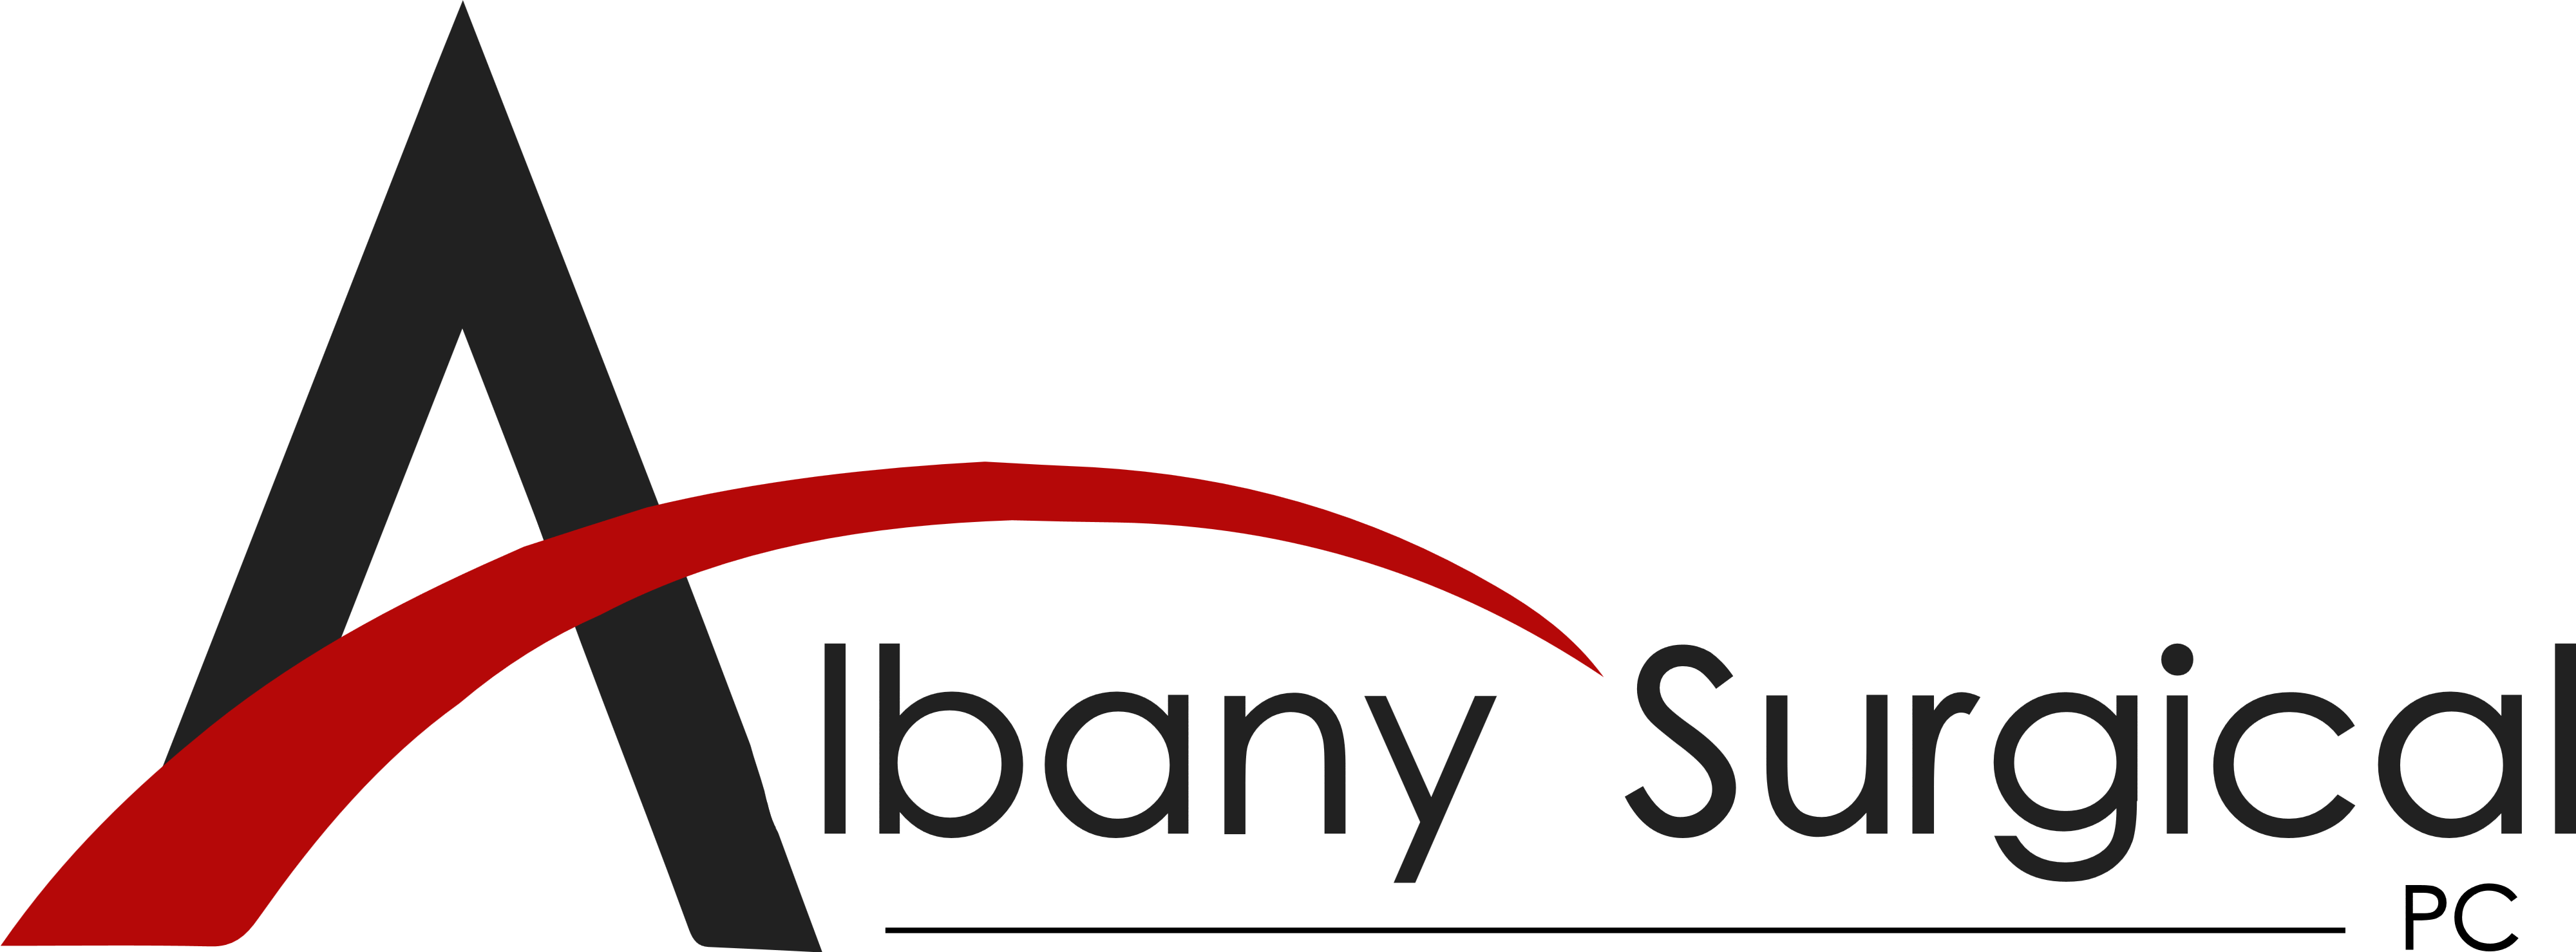 Albany Surgical – Logos Download